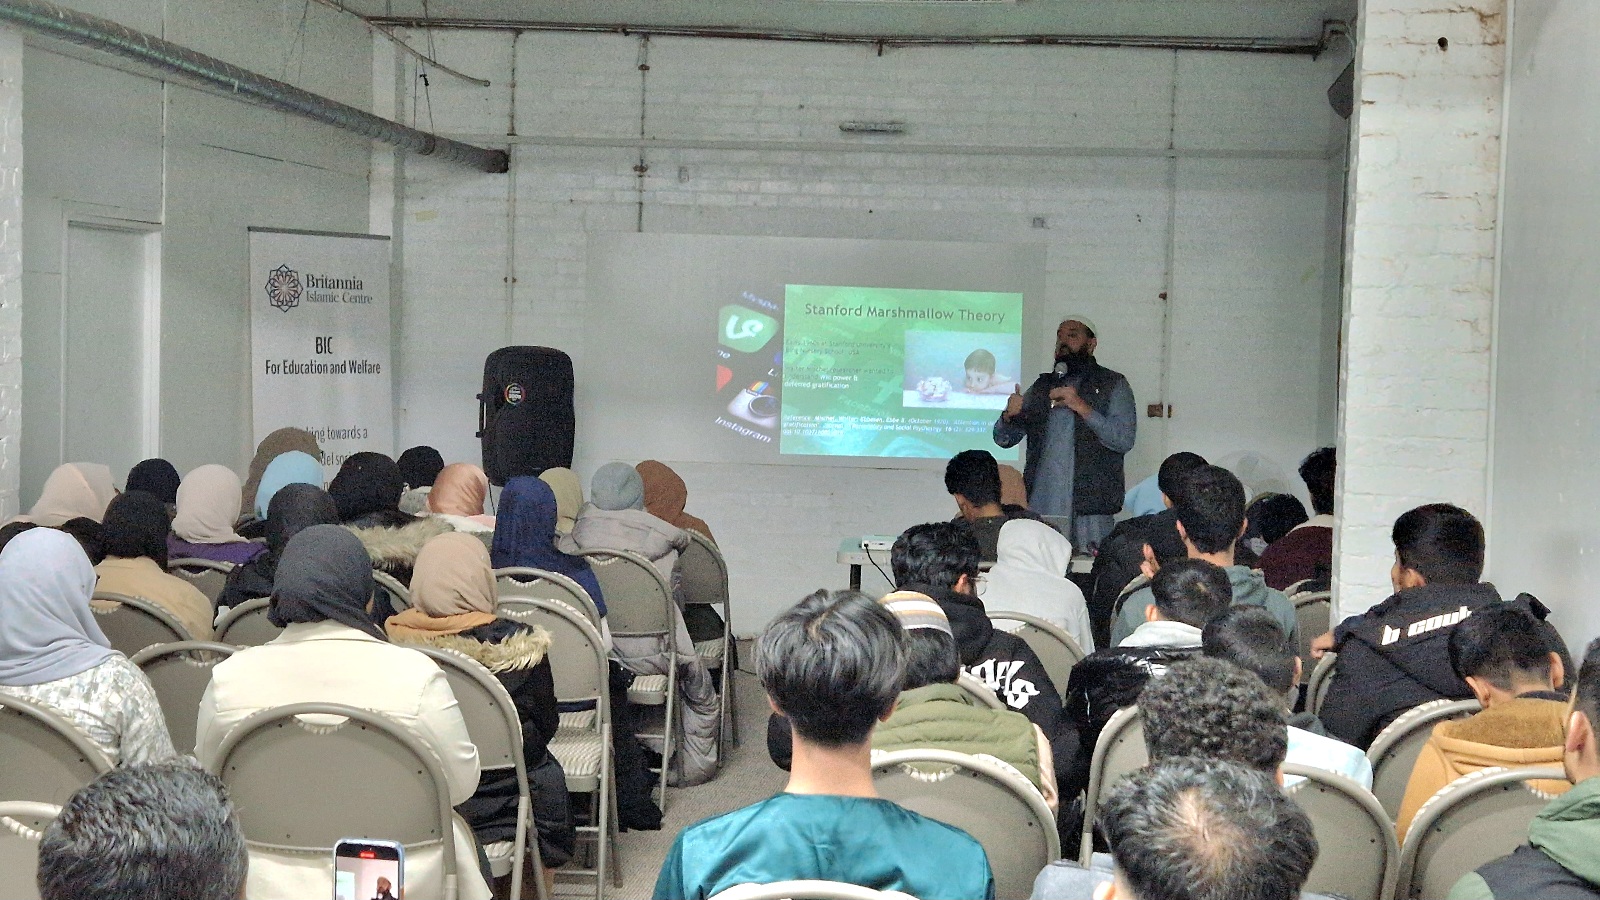 BEING 21 ST CENTURY PRODUCTIVE MUSLIM - A successful youth event held at the BIC this weekend